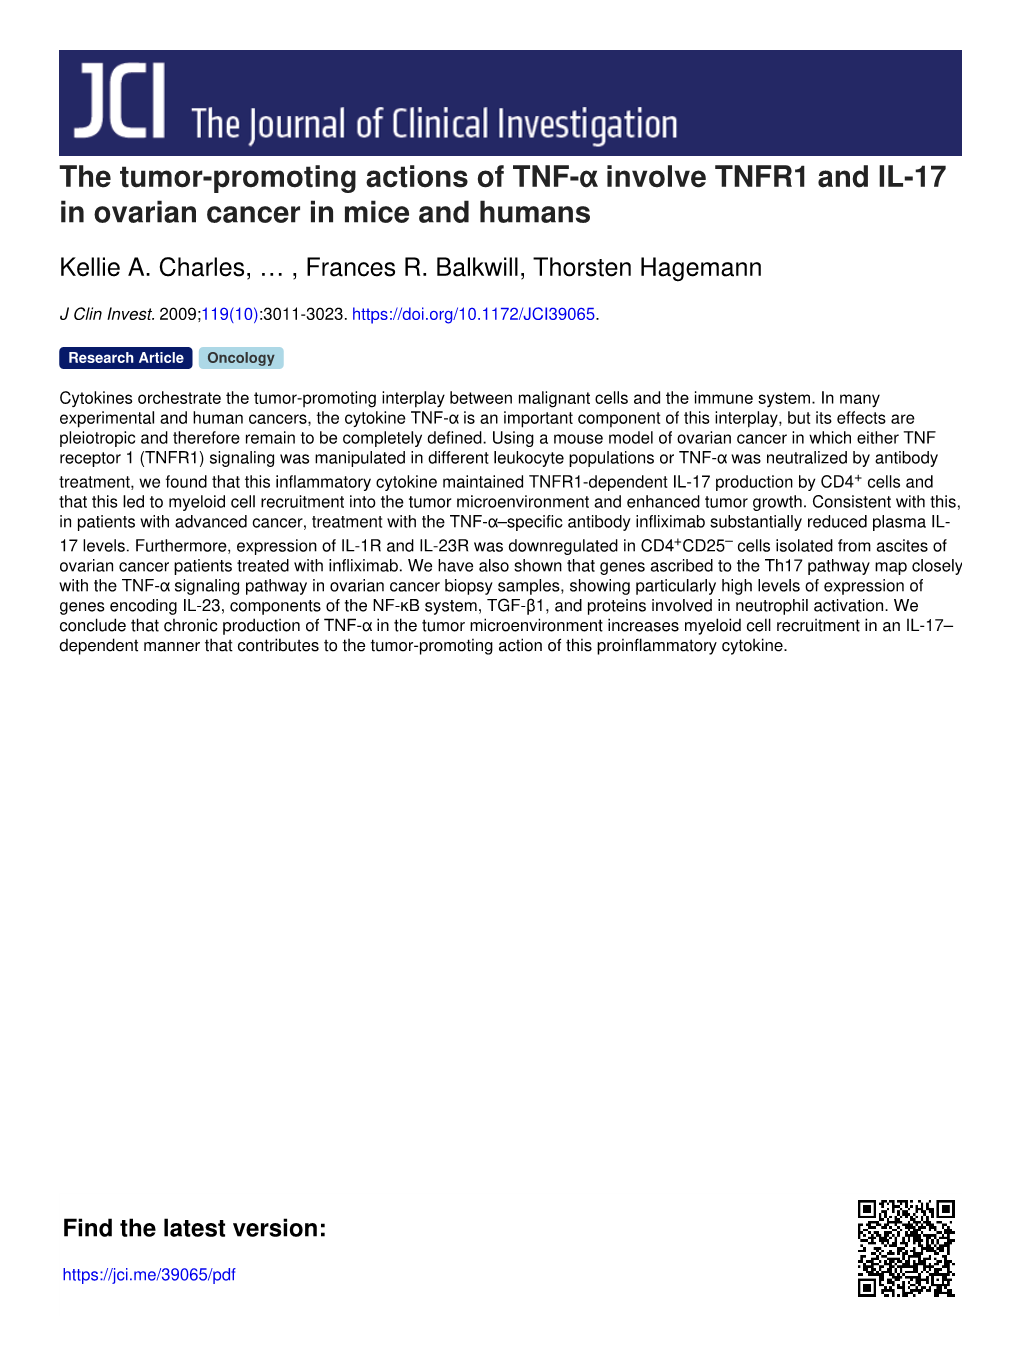 The Tumor-Promoting Actions of TNF-Α Involve TNFR1 and IL-17 in Ovarian Cancer in Mice and Humans